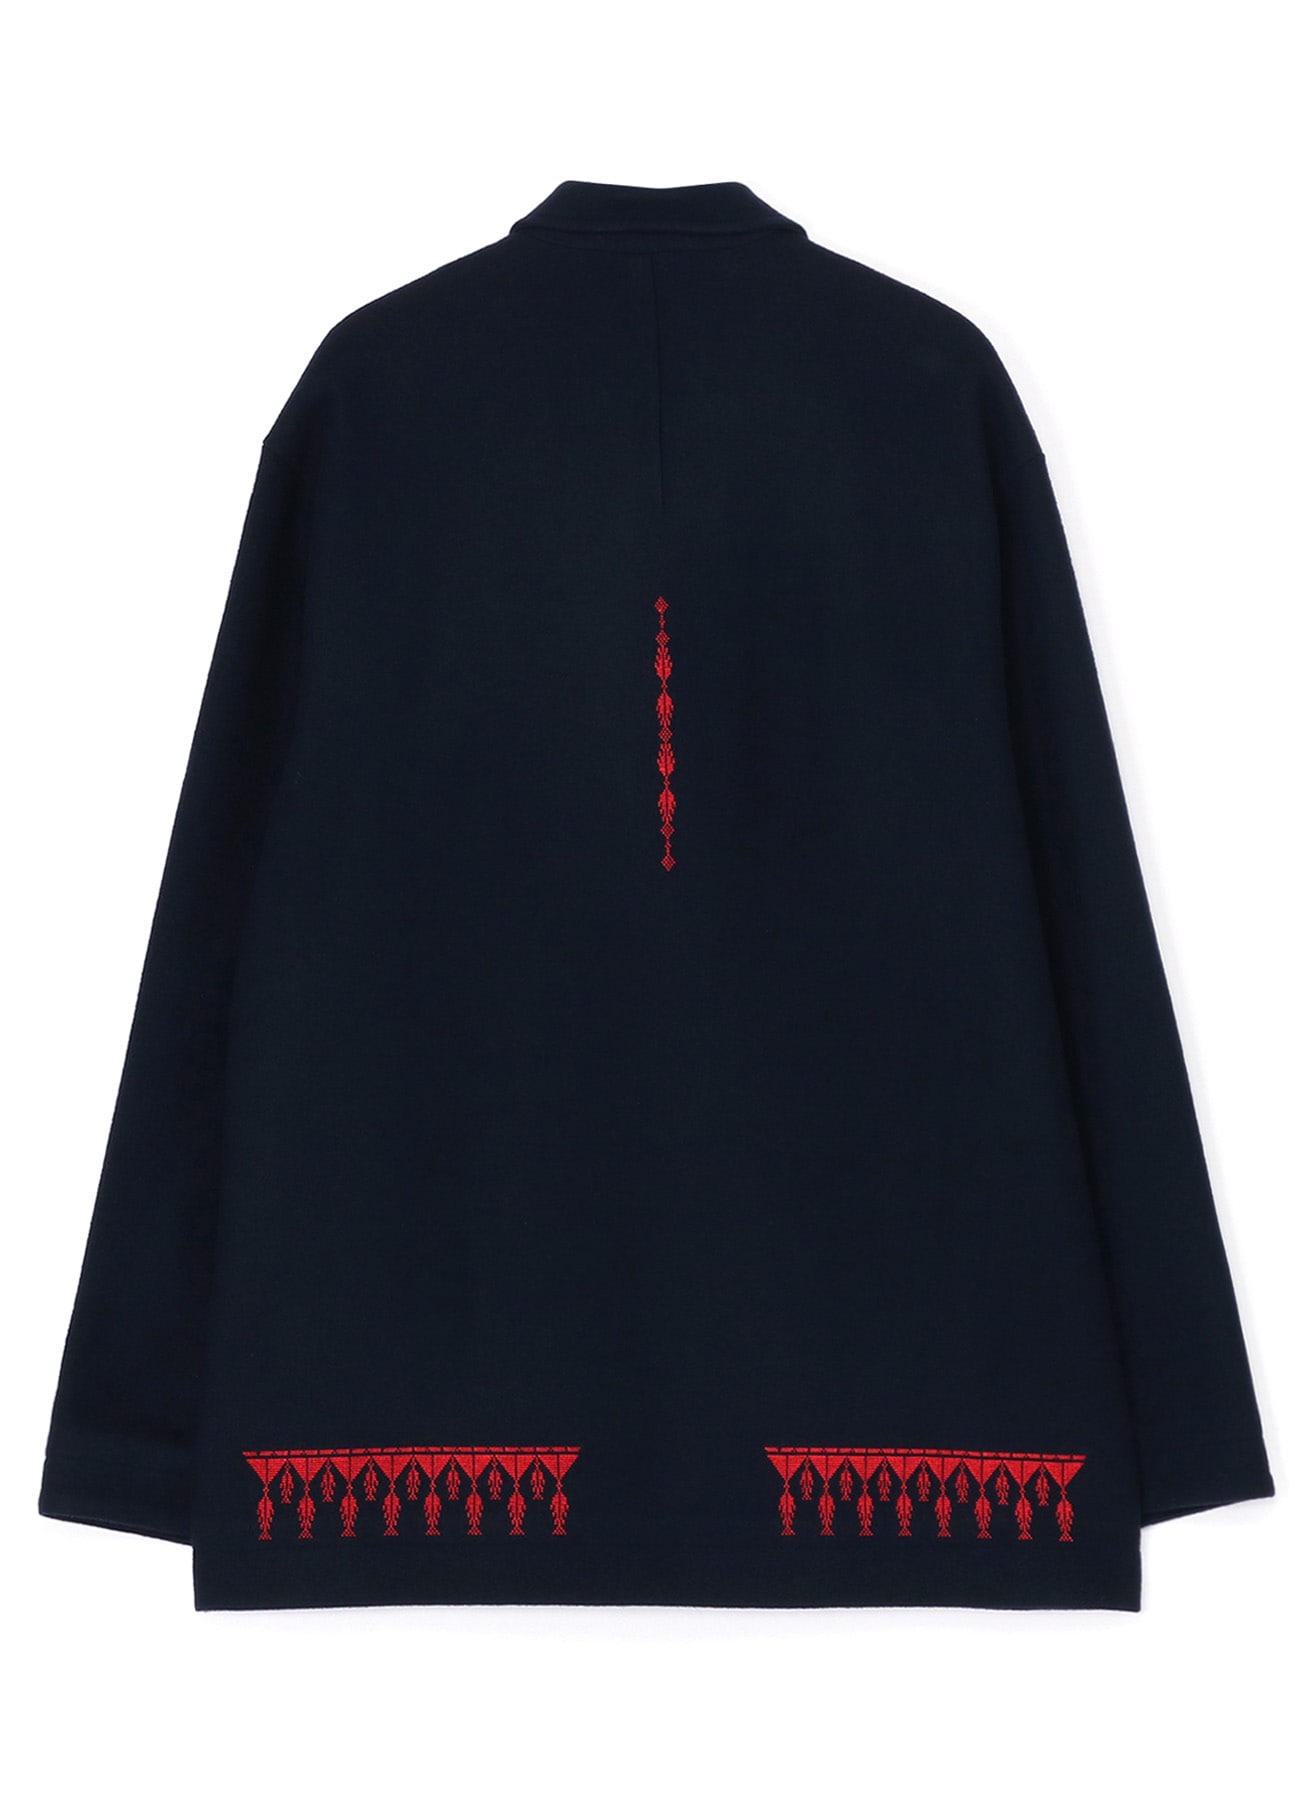 COMPRESSED JERSEY ETHNIC EMBROIDERED BLOUSON(M Navy): S'YTE｜THE 